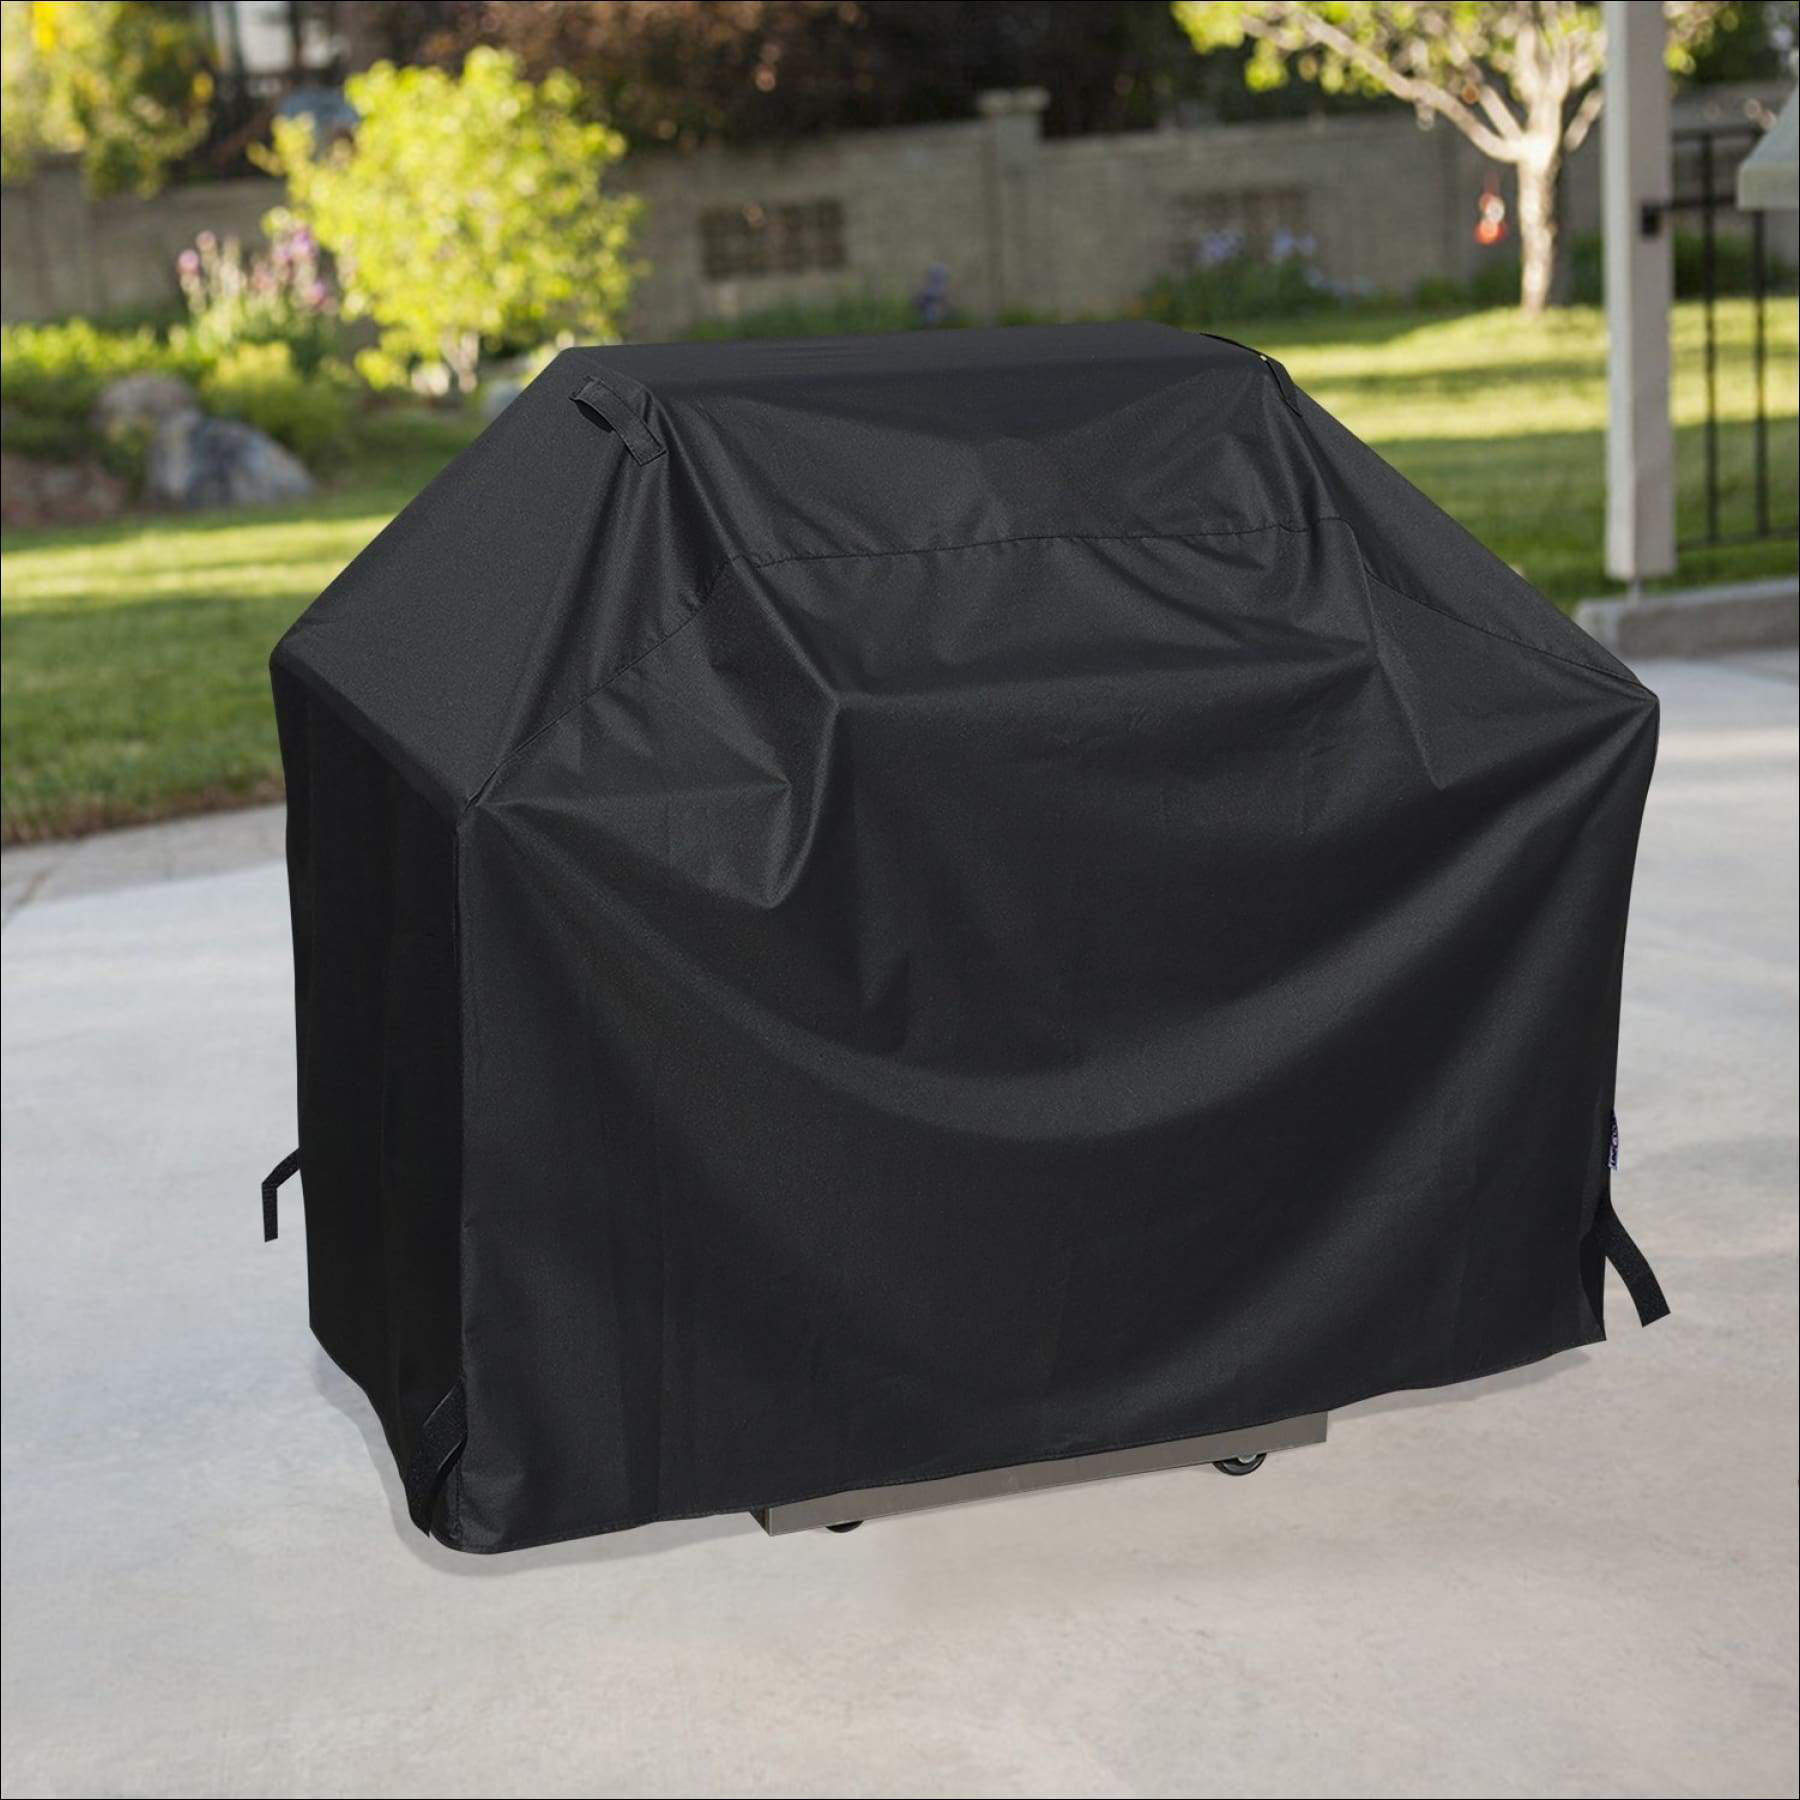 48''X47'' BBQ Barbecue Gas Grill Cover Waterproof Heavy Duty Outdoor Dust Proof 